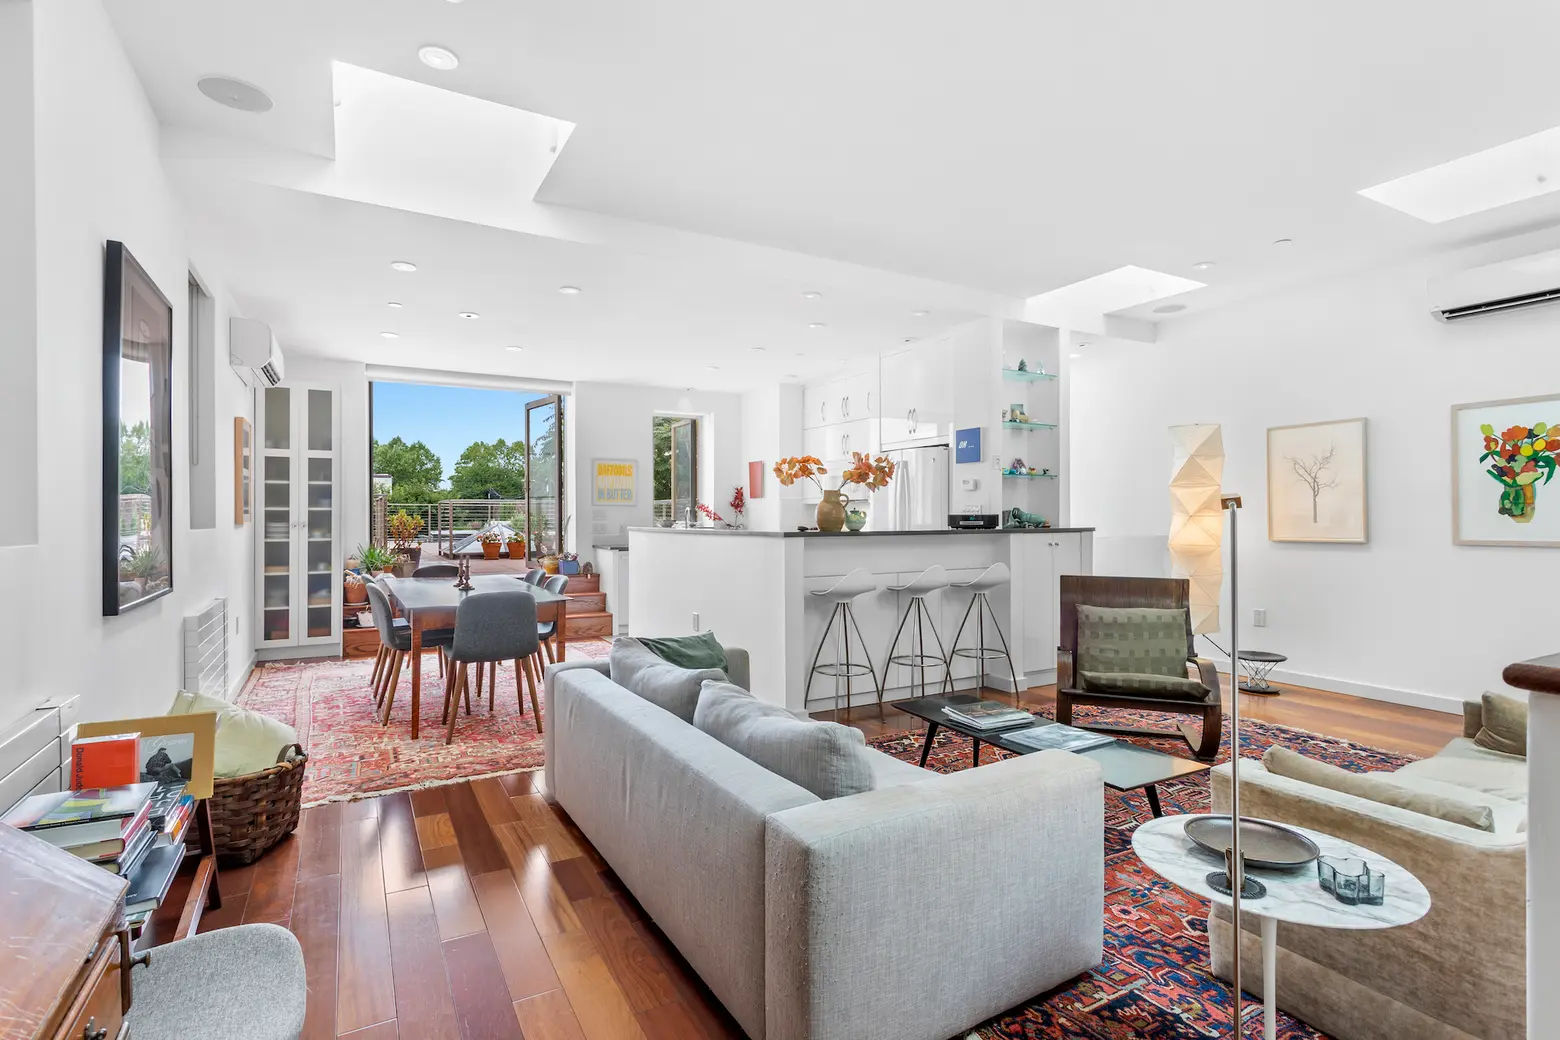 This $4.9M unicorn of a Williamsburg townhouse has a guest suite, garage, art studio, and roof deck